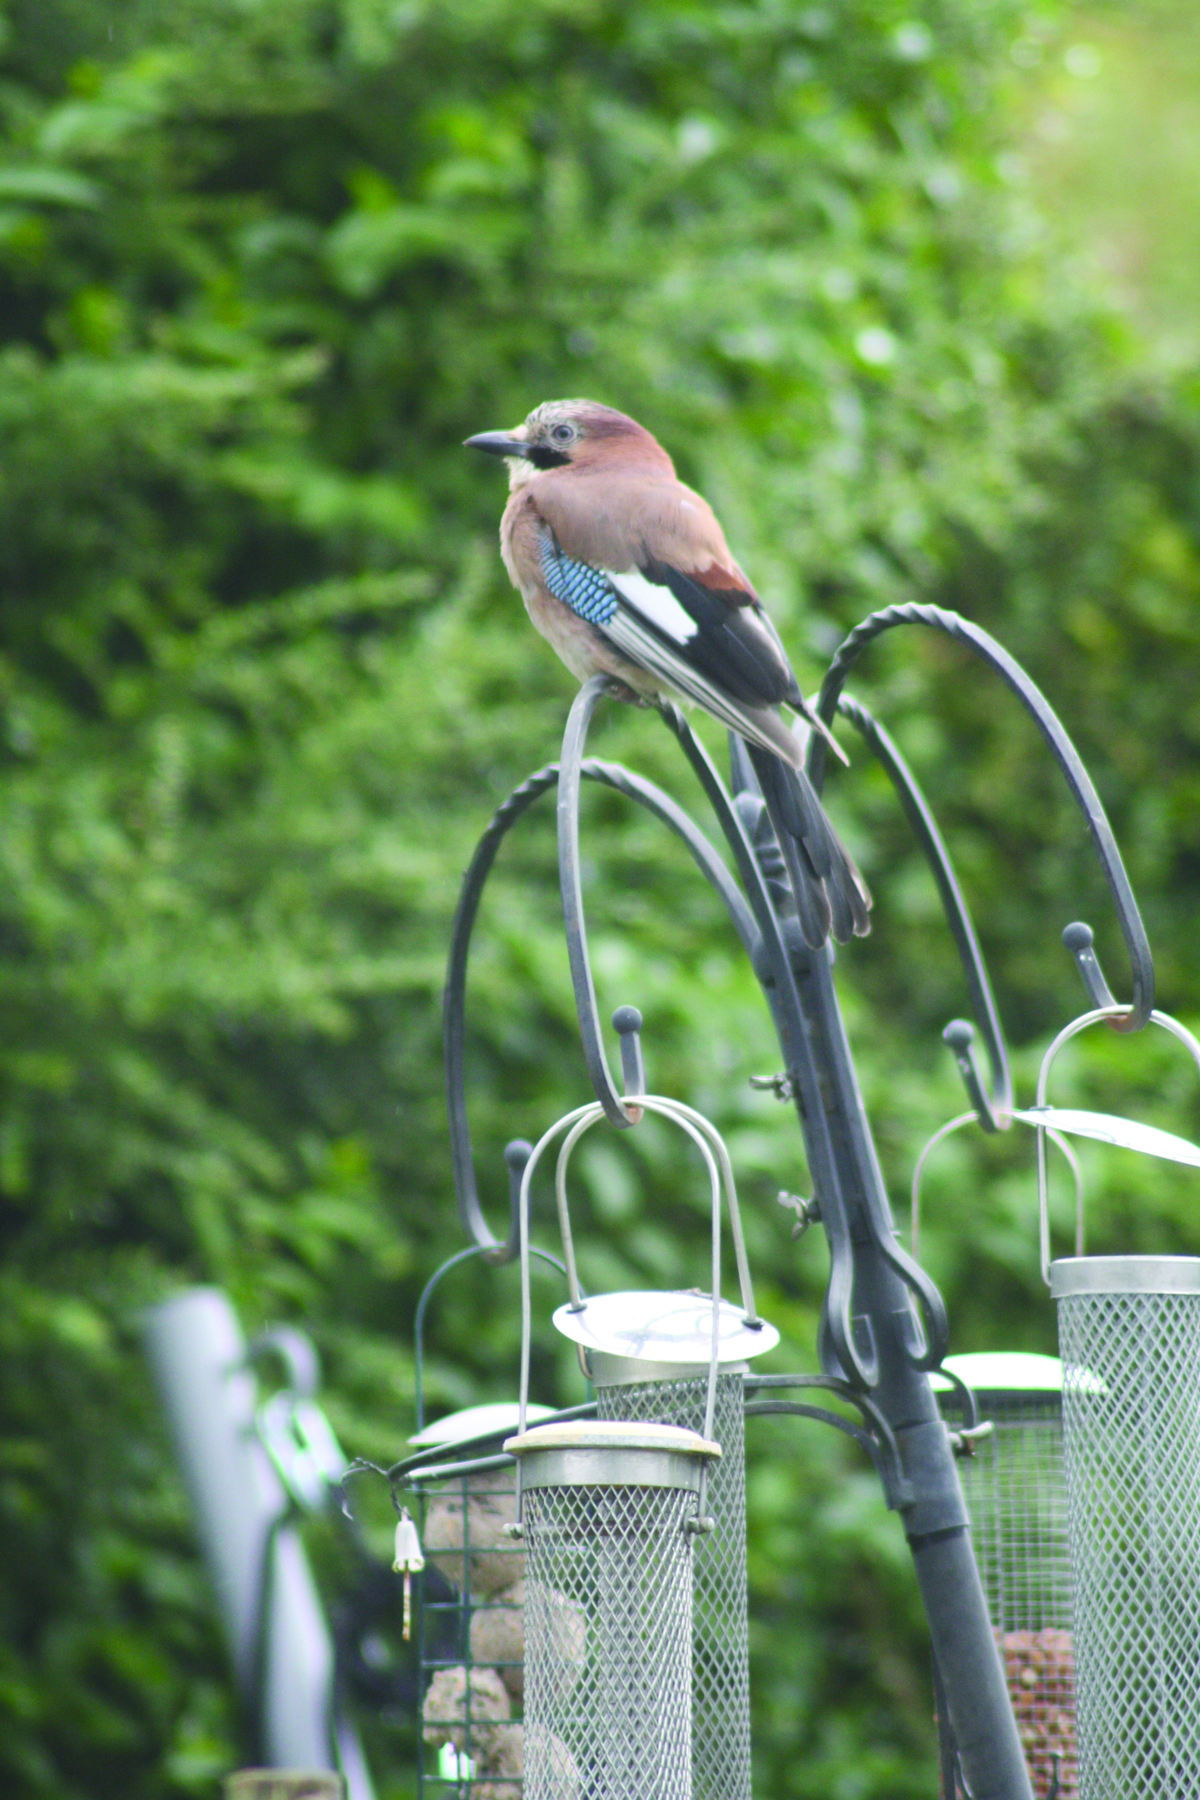 GUEST OF HONOUR: The beautiful jay perches on Dúlra feeders and surveys the territory